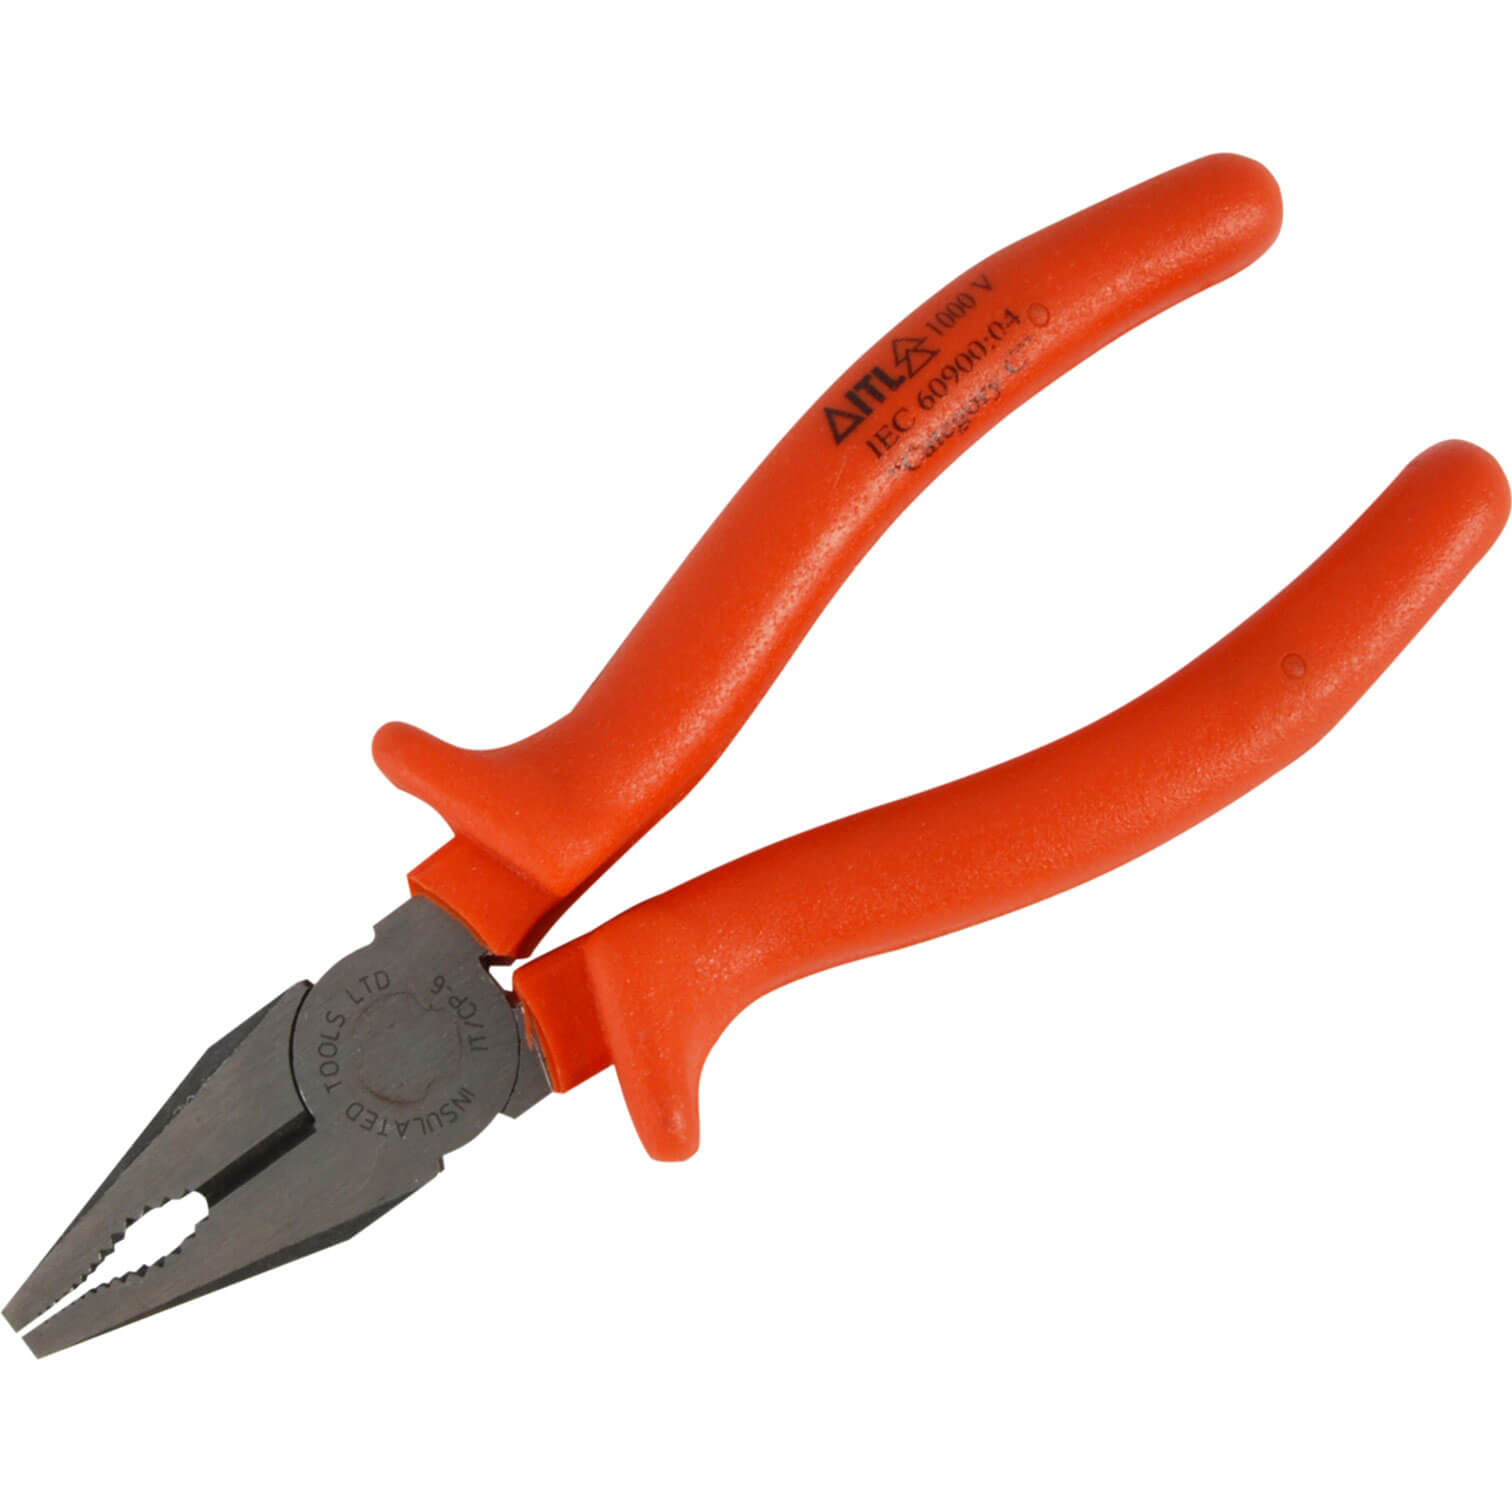 ITL Insulated Combination Pliers 150mm